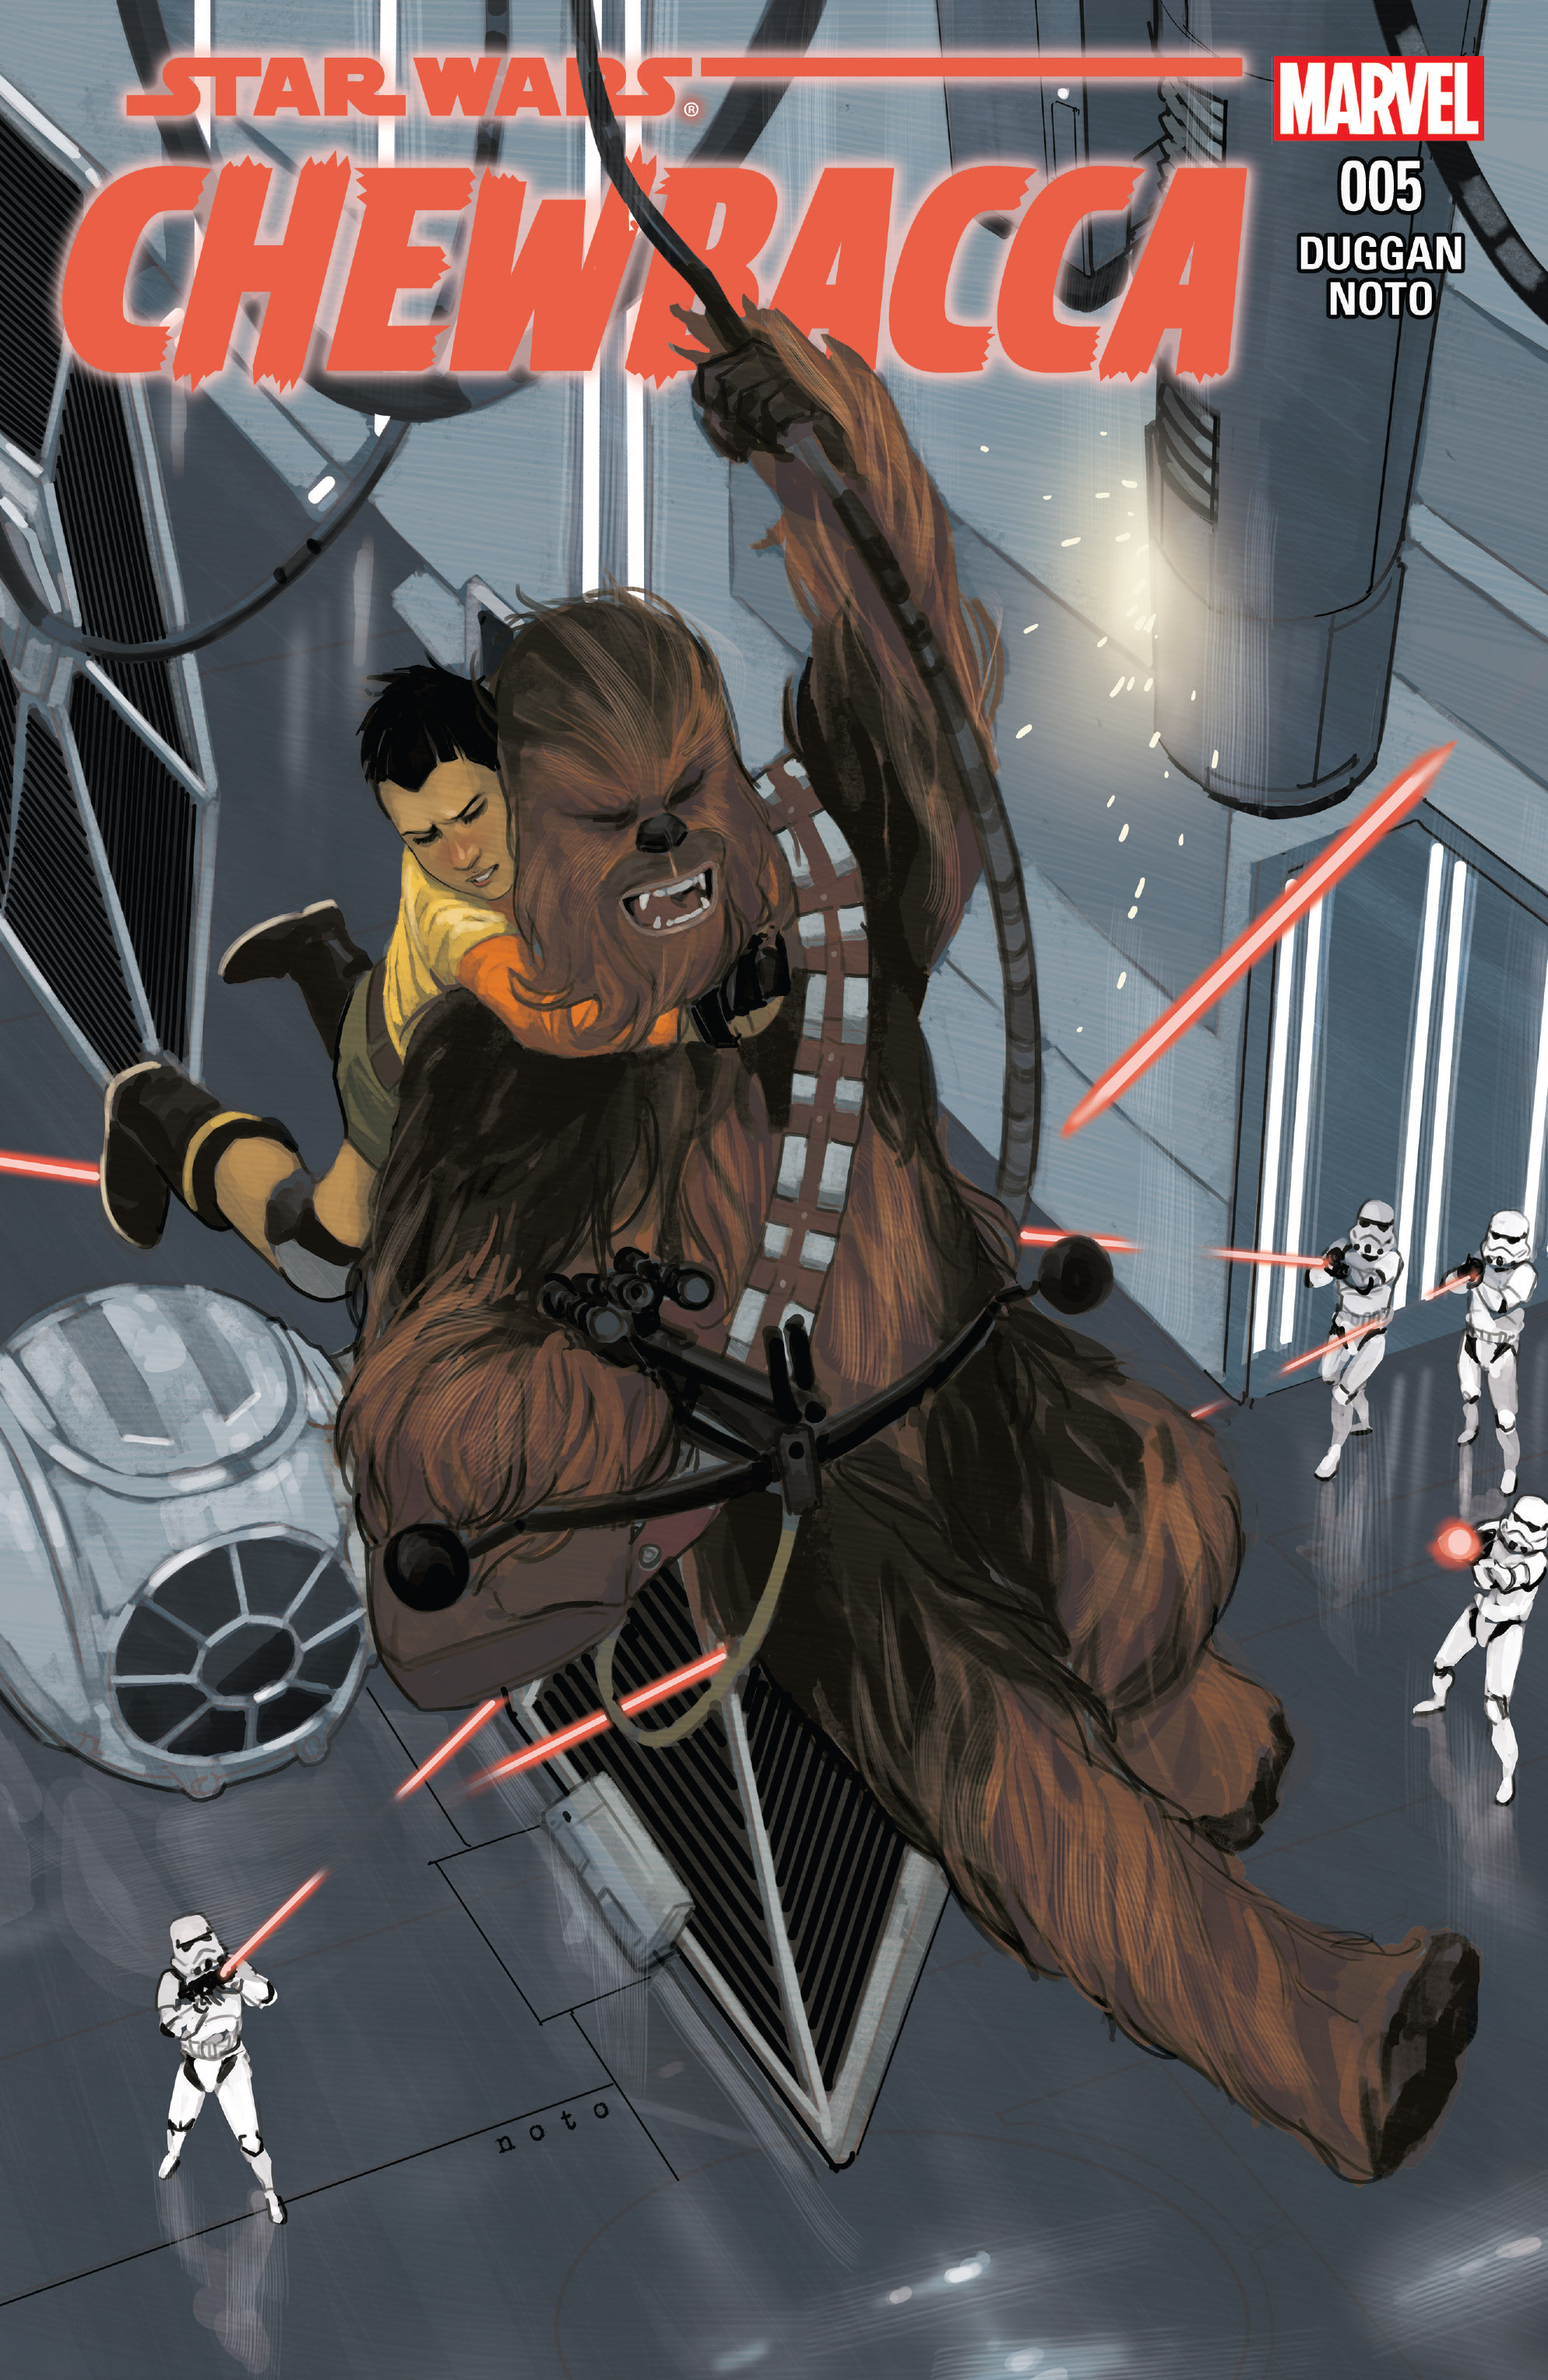 Read online Chewbacca comic -  Issue #5 - 1